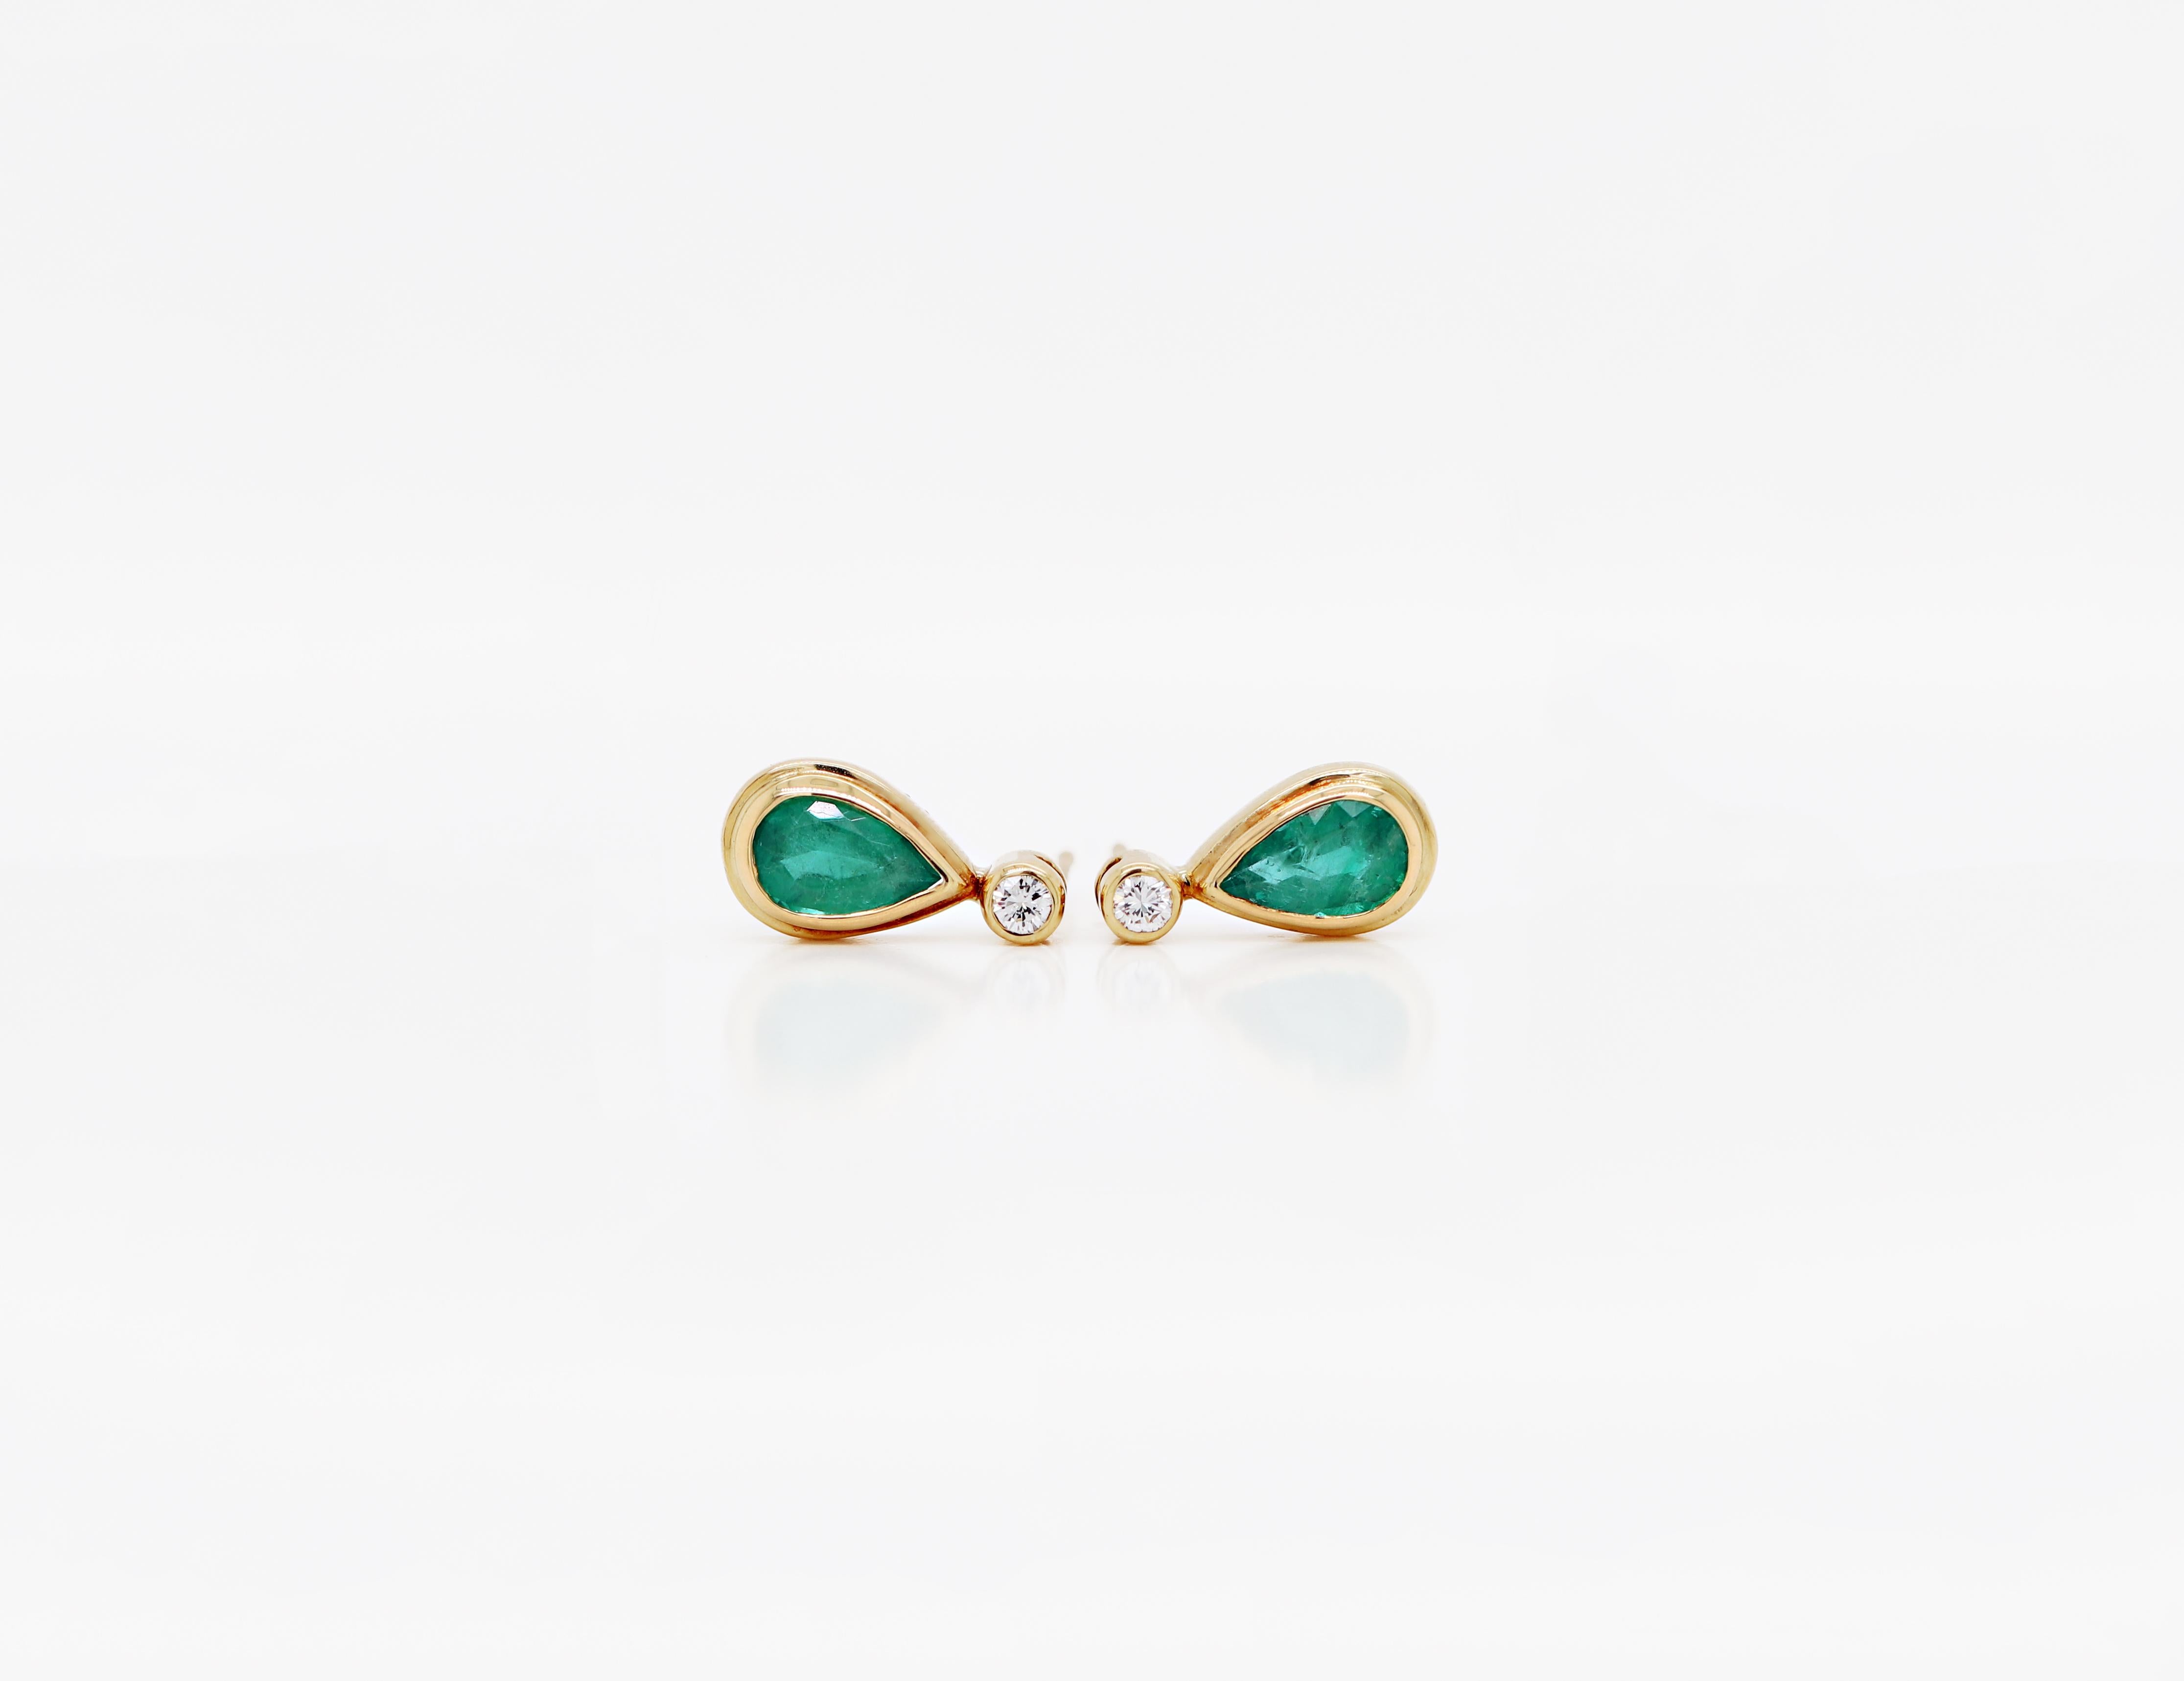 These beautiful earrings feature a vibrant pear shaped emerald weighing approximately 1.00ct each, mounted in a rub over, open back setting. The emerald is wonderfully accompanied by a fine quality round brilliant cut diamond above it, weighing